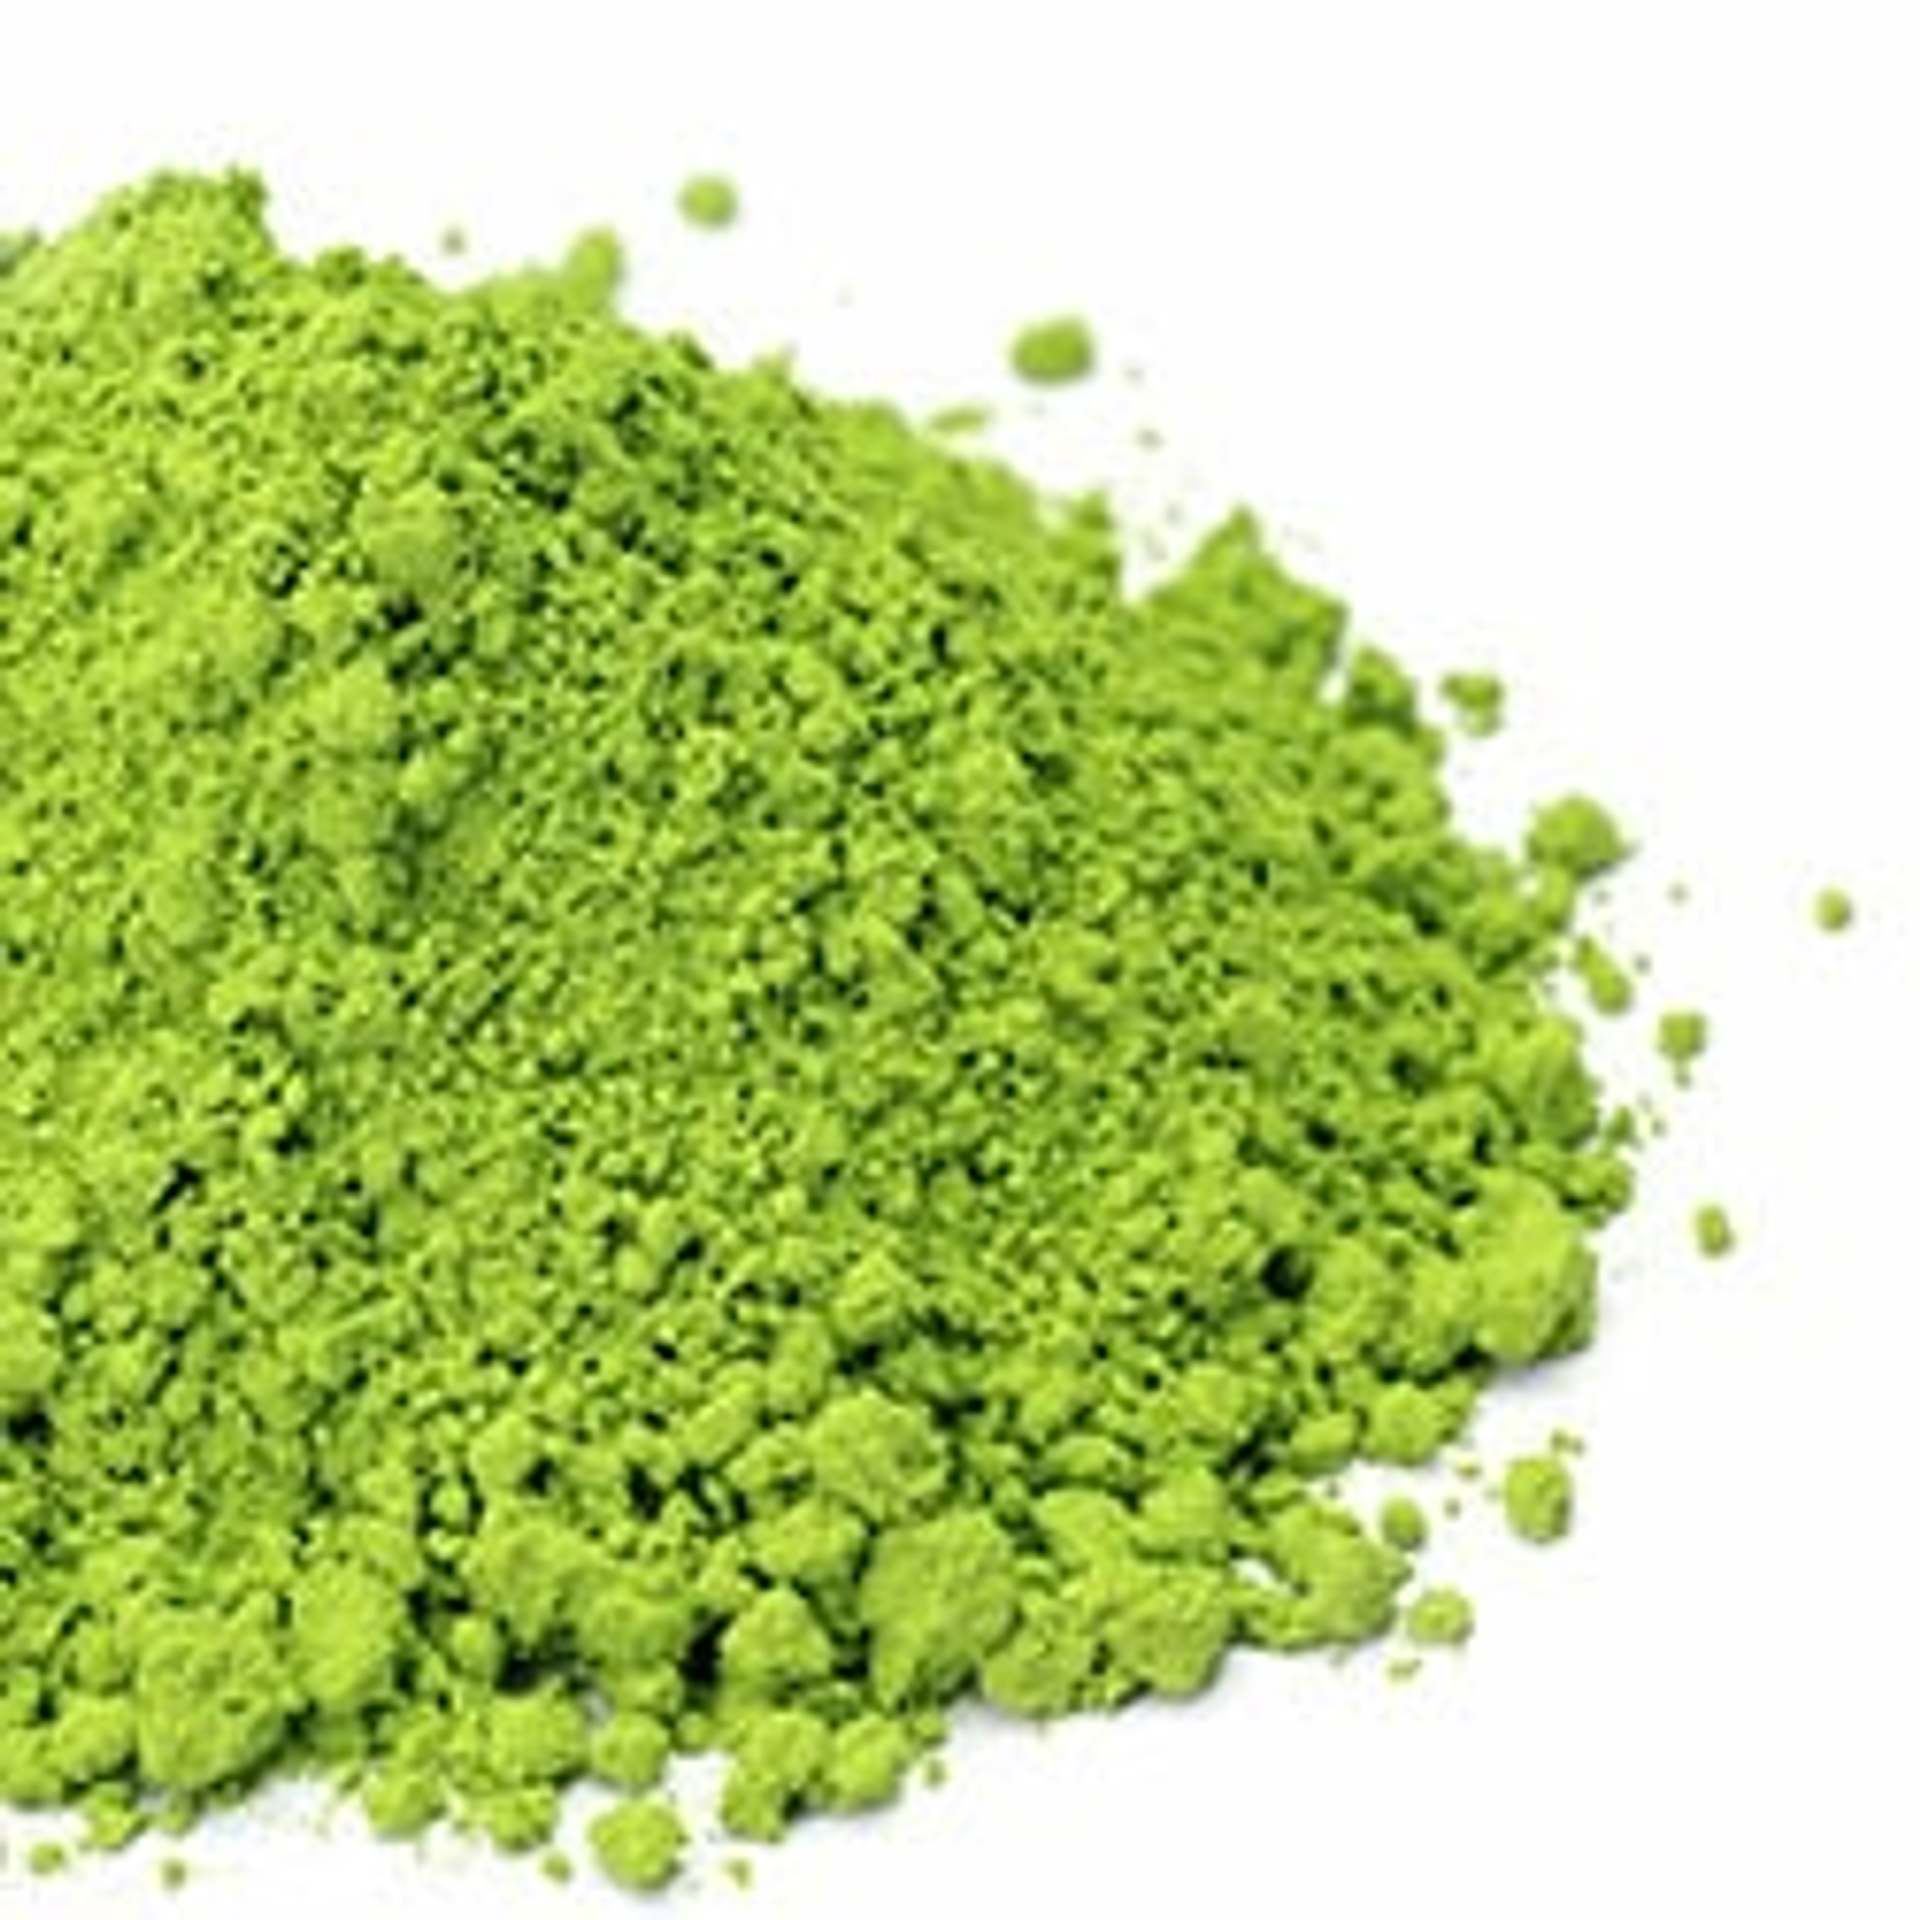 Barley grass powder is purely natural, packed with vital substances, amino acids, bioflavonoids, antioxidants and chlorophyll.